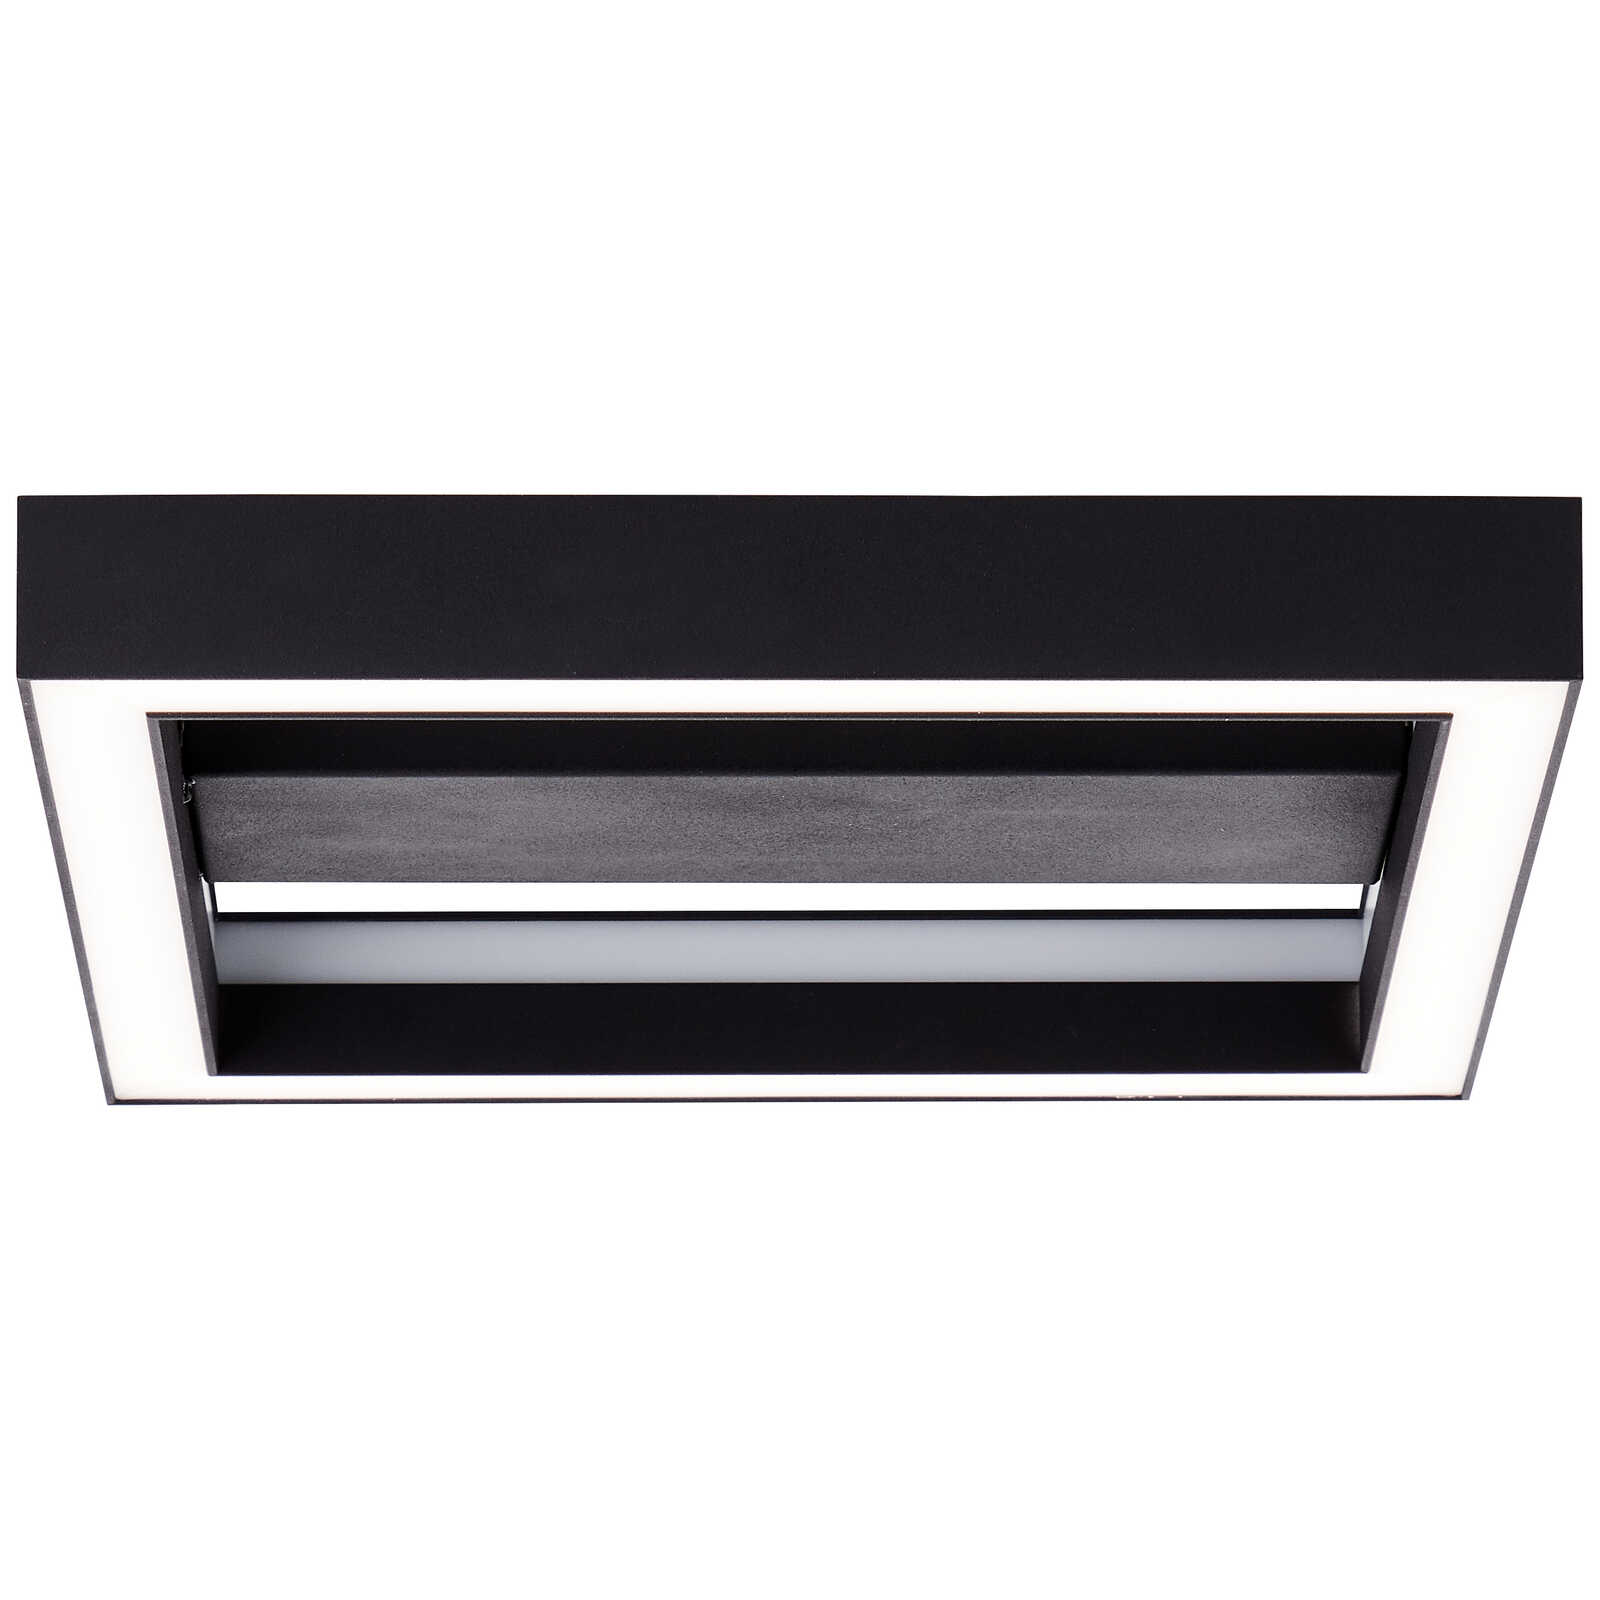             Plastic wall and ceiling light - Janis 2 - Black
        